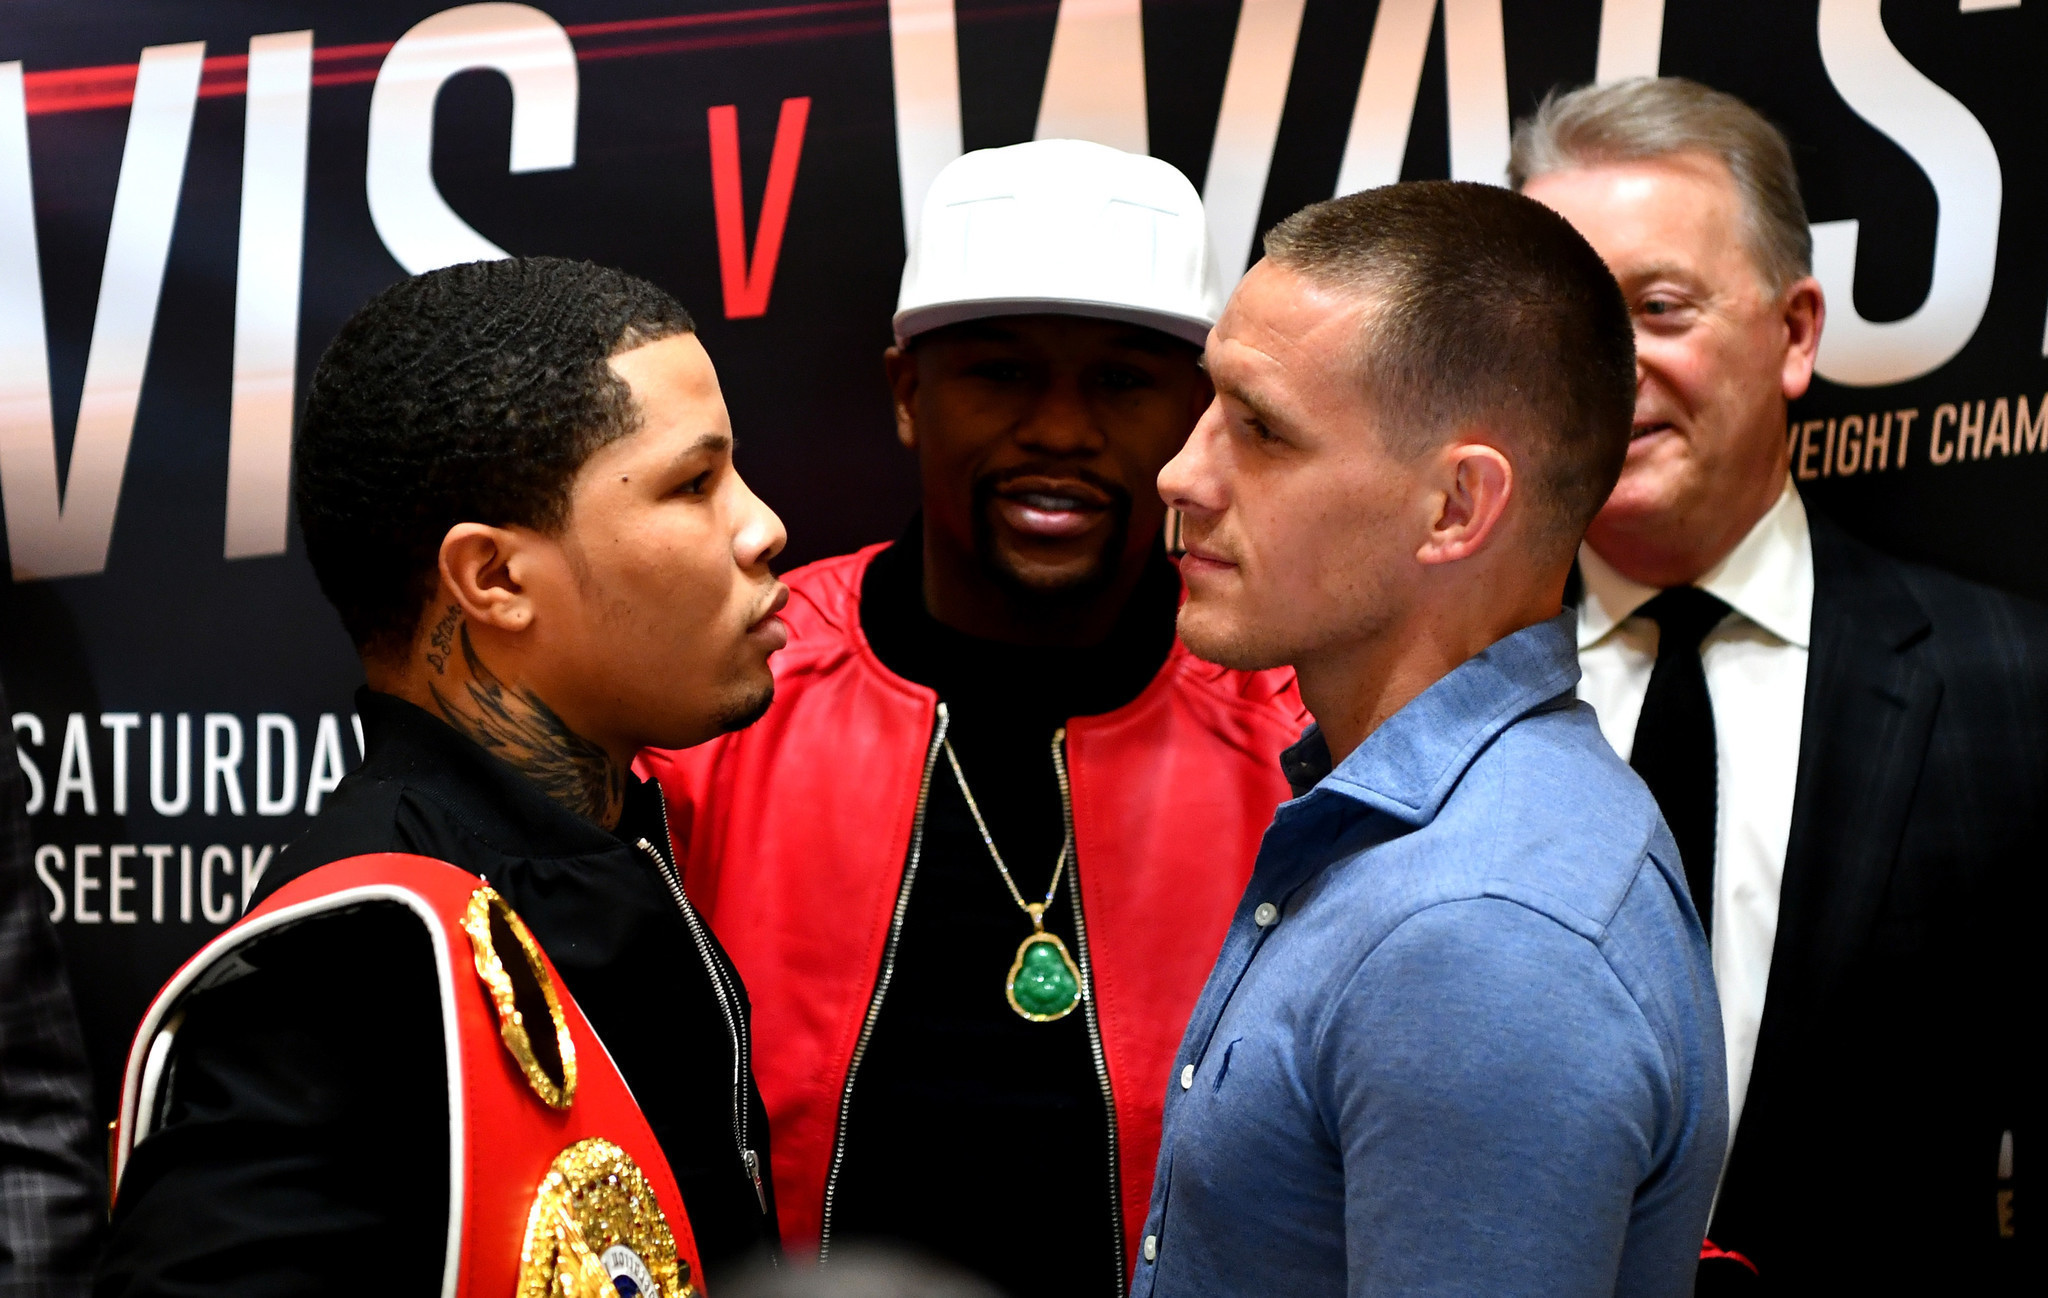 Gervonta Davis' next fight will be against British challenger in London on May 20 ...2048 x 1298